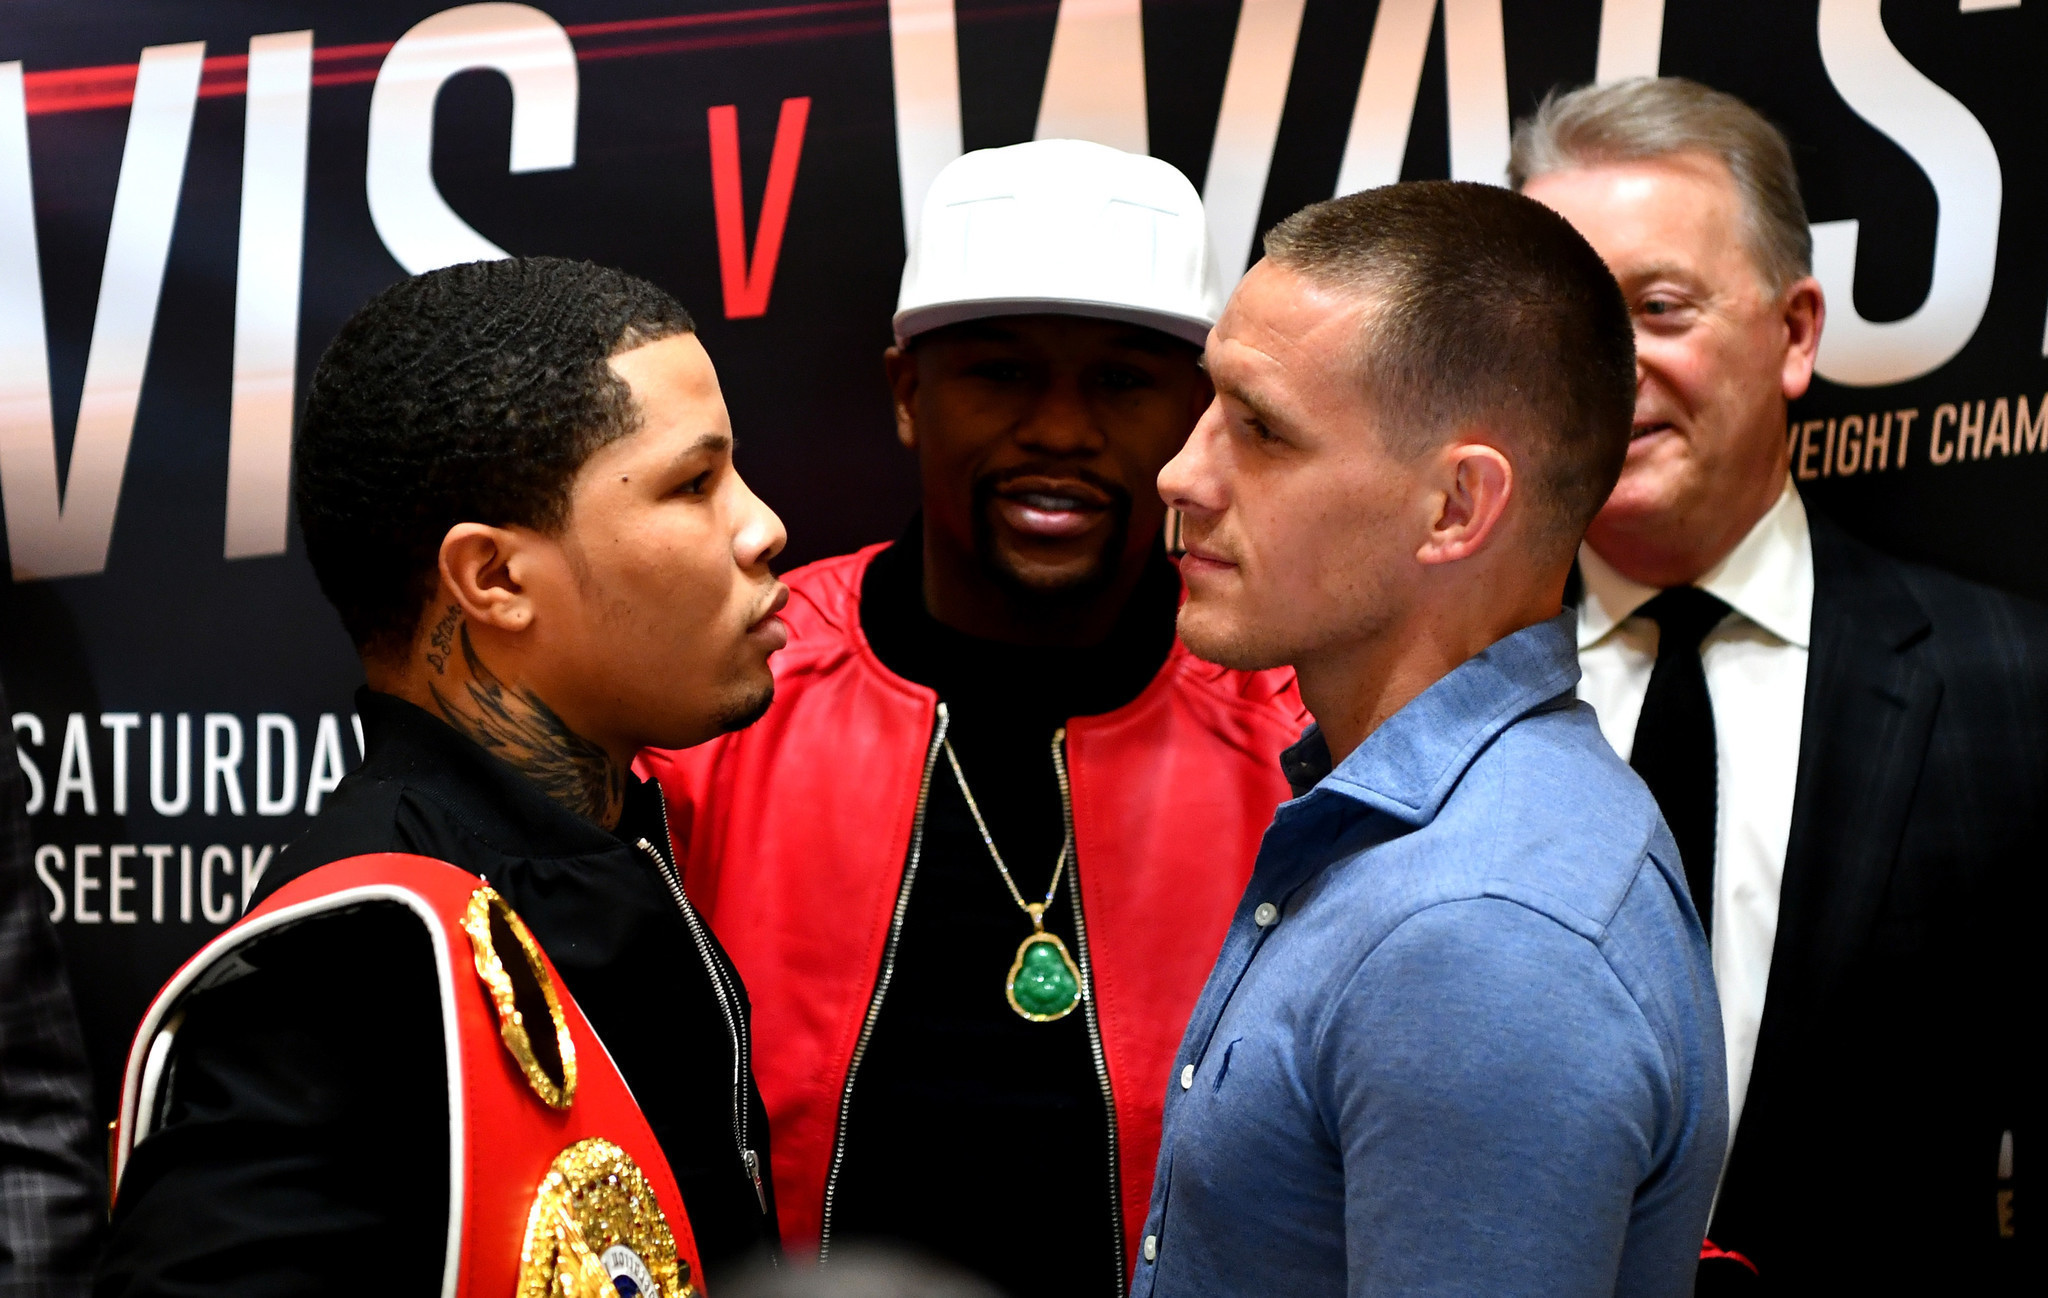 Gervonta Davis' next fight will be against British challenger in London on May 20 ...2048 x 1298